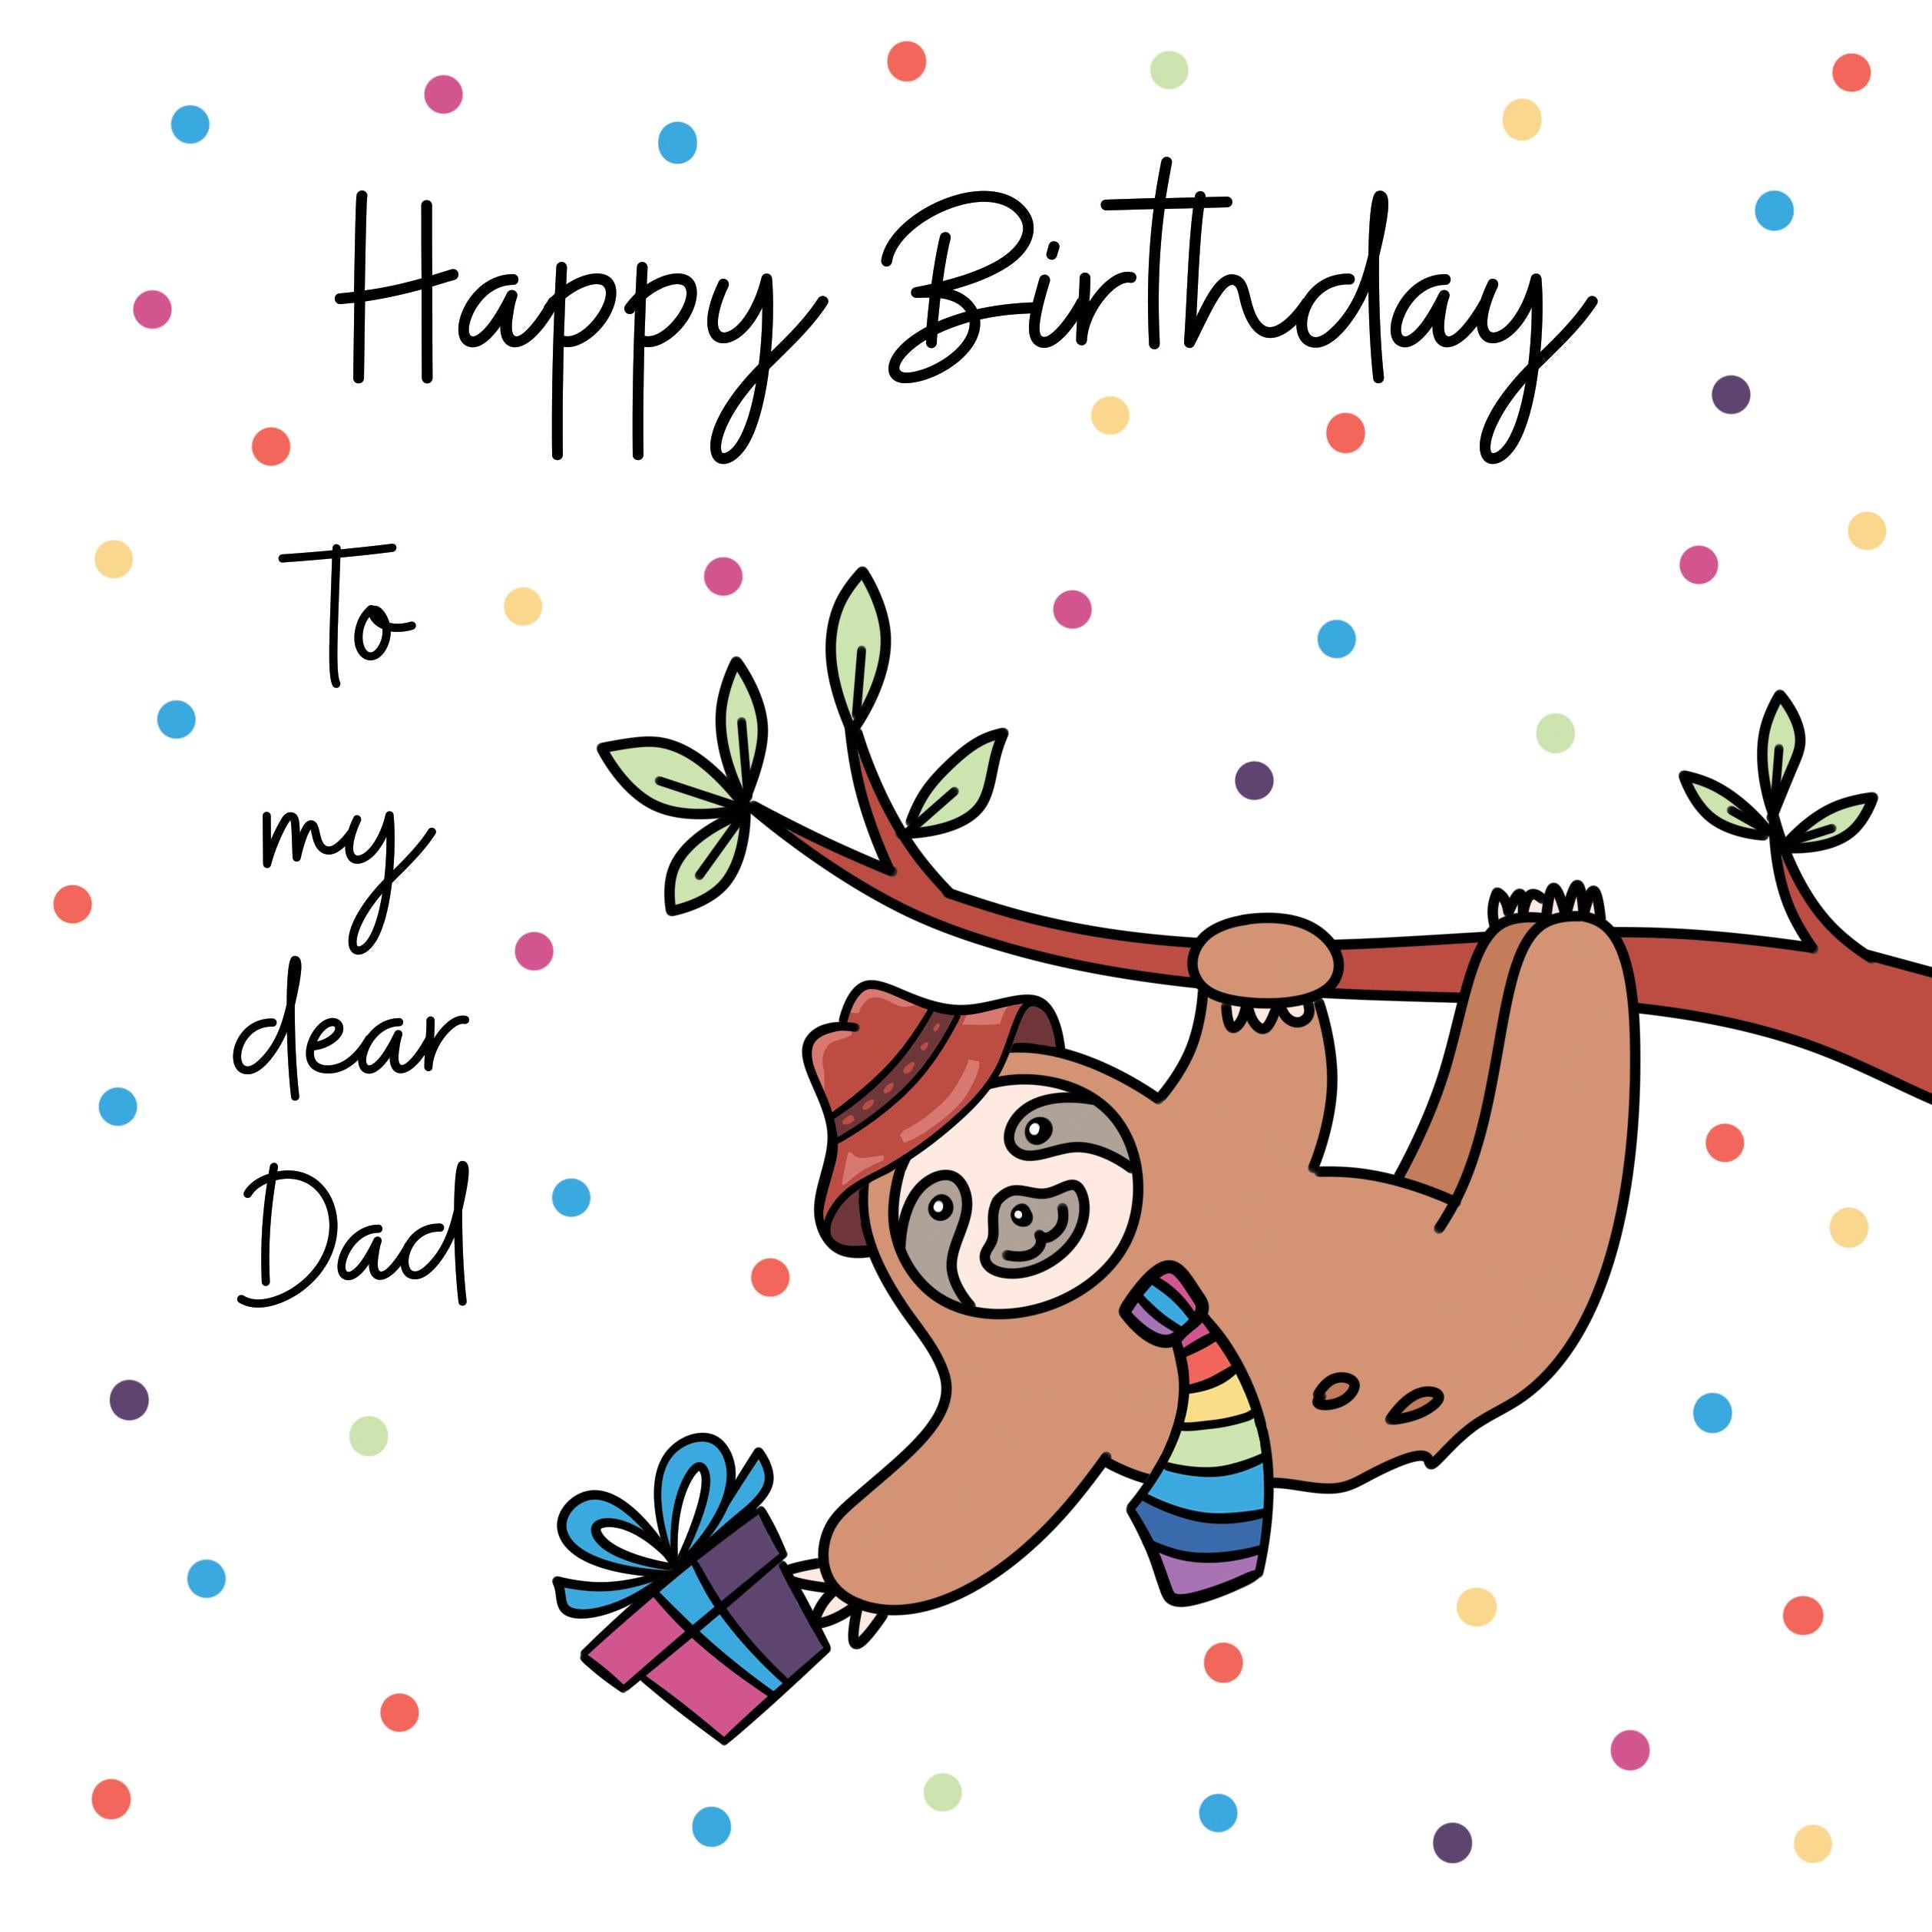 Happy Birthday Dad Sloth With A Gift Hanging On A Tree Confetti-explod –  Boomf